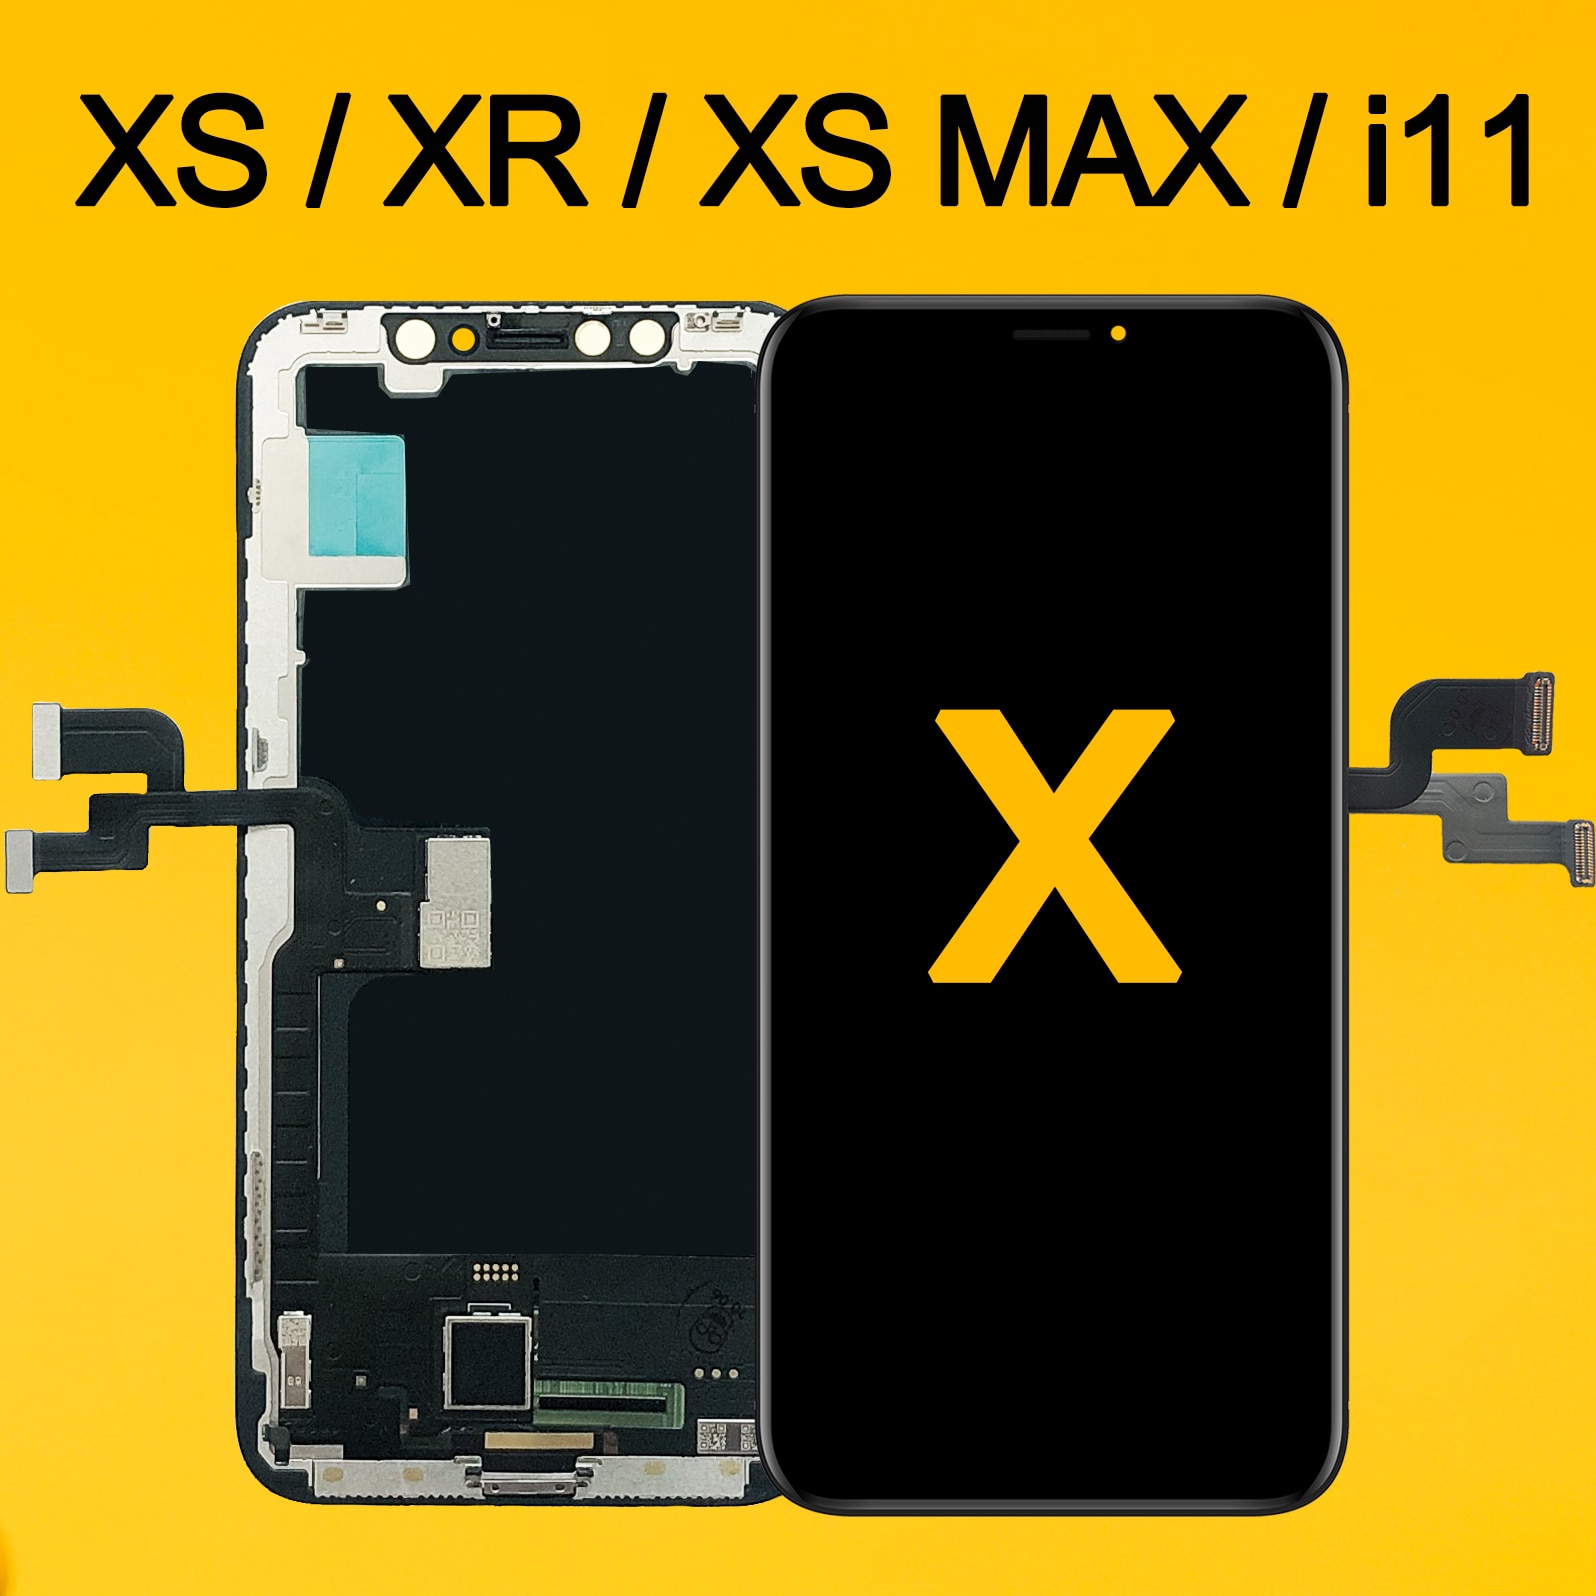 AAA For iPhone X OLED LCD Display For IPhone XS XR MAX Inell LCD 11 Touch Screen Digitizer Replacement Assembly Parts OEM OLED